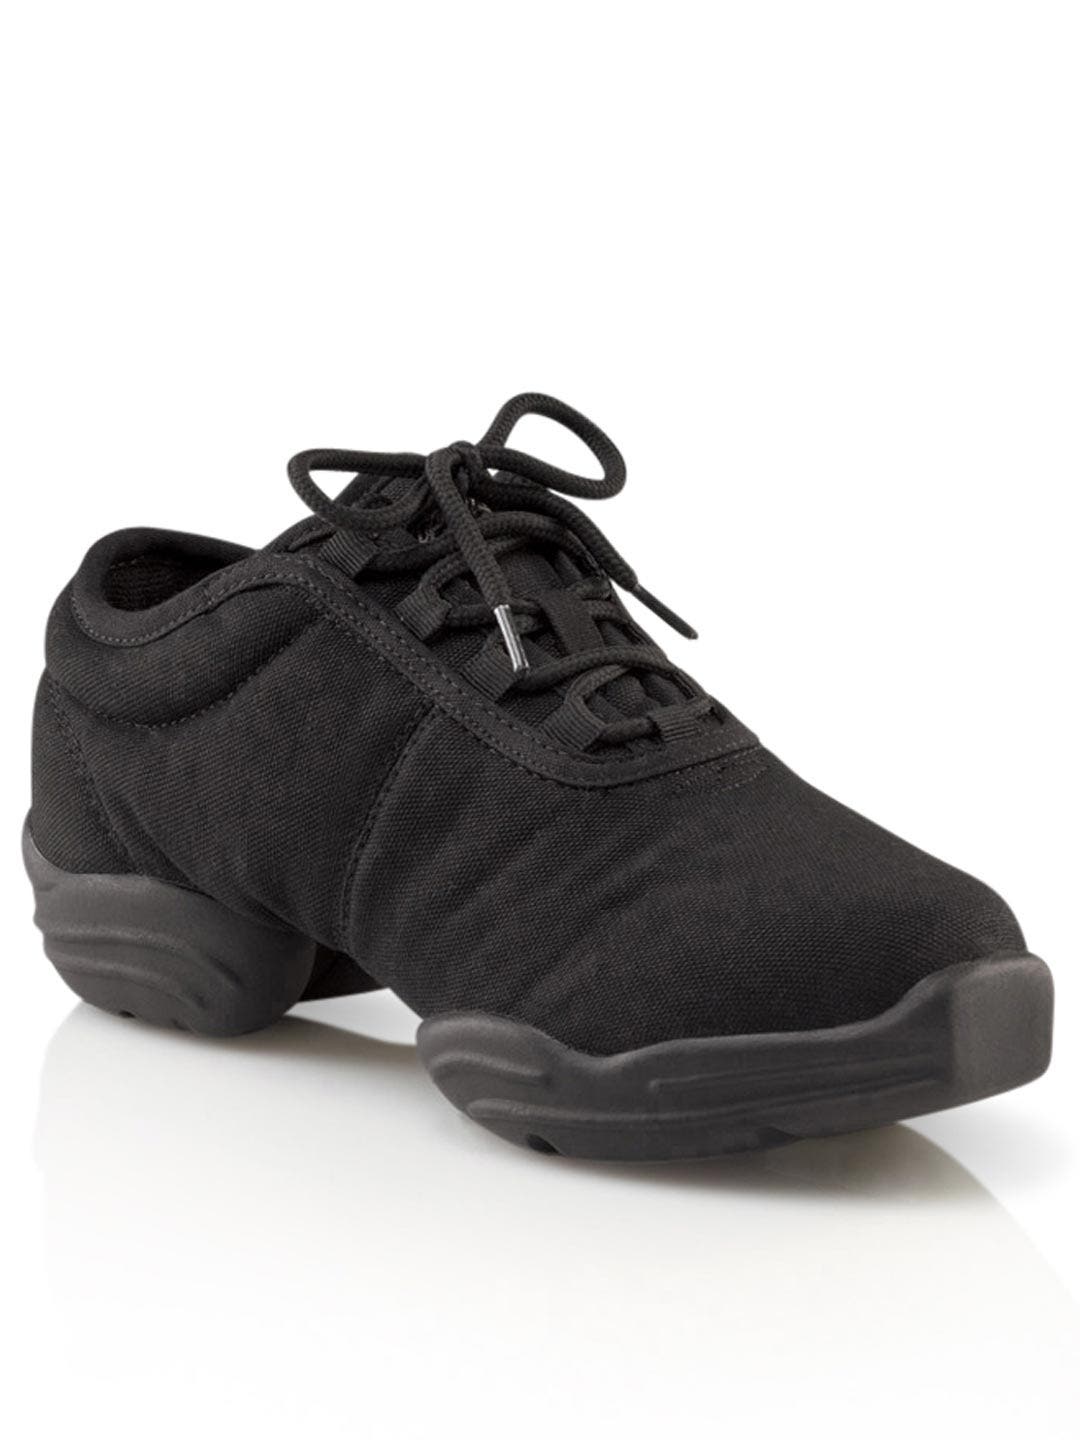 DSI In-Stock Ever Jazz Guard and Dance Shoes - Drillcomp, Inc.